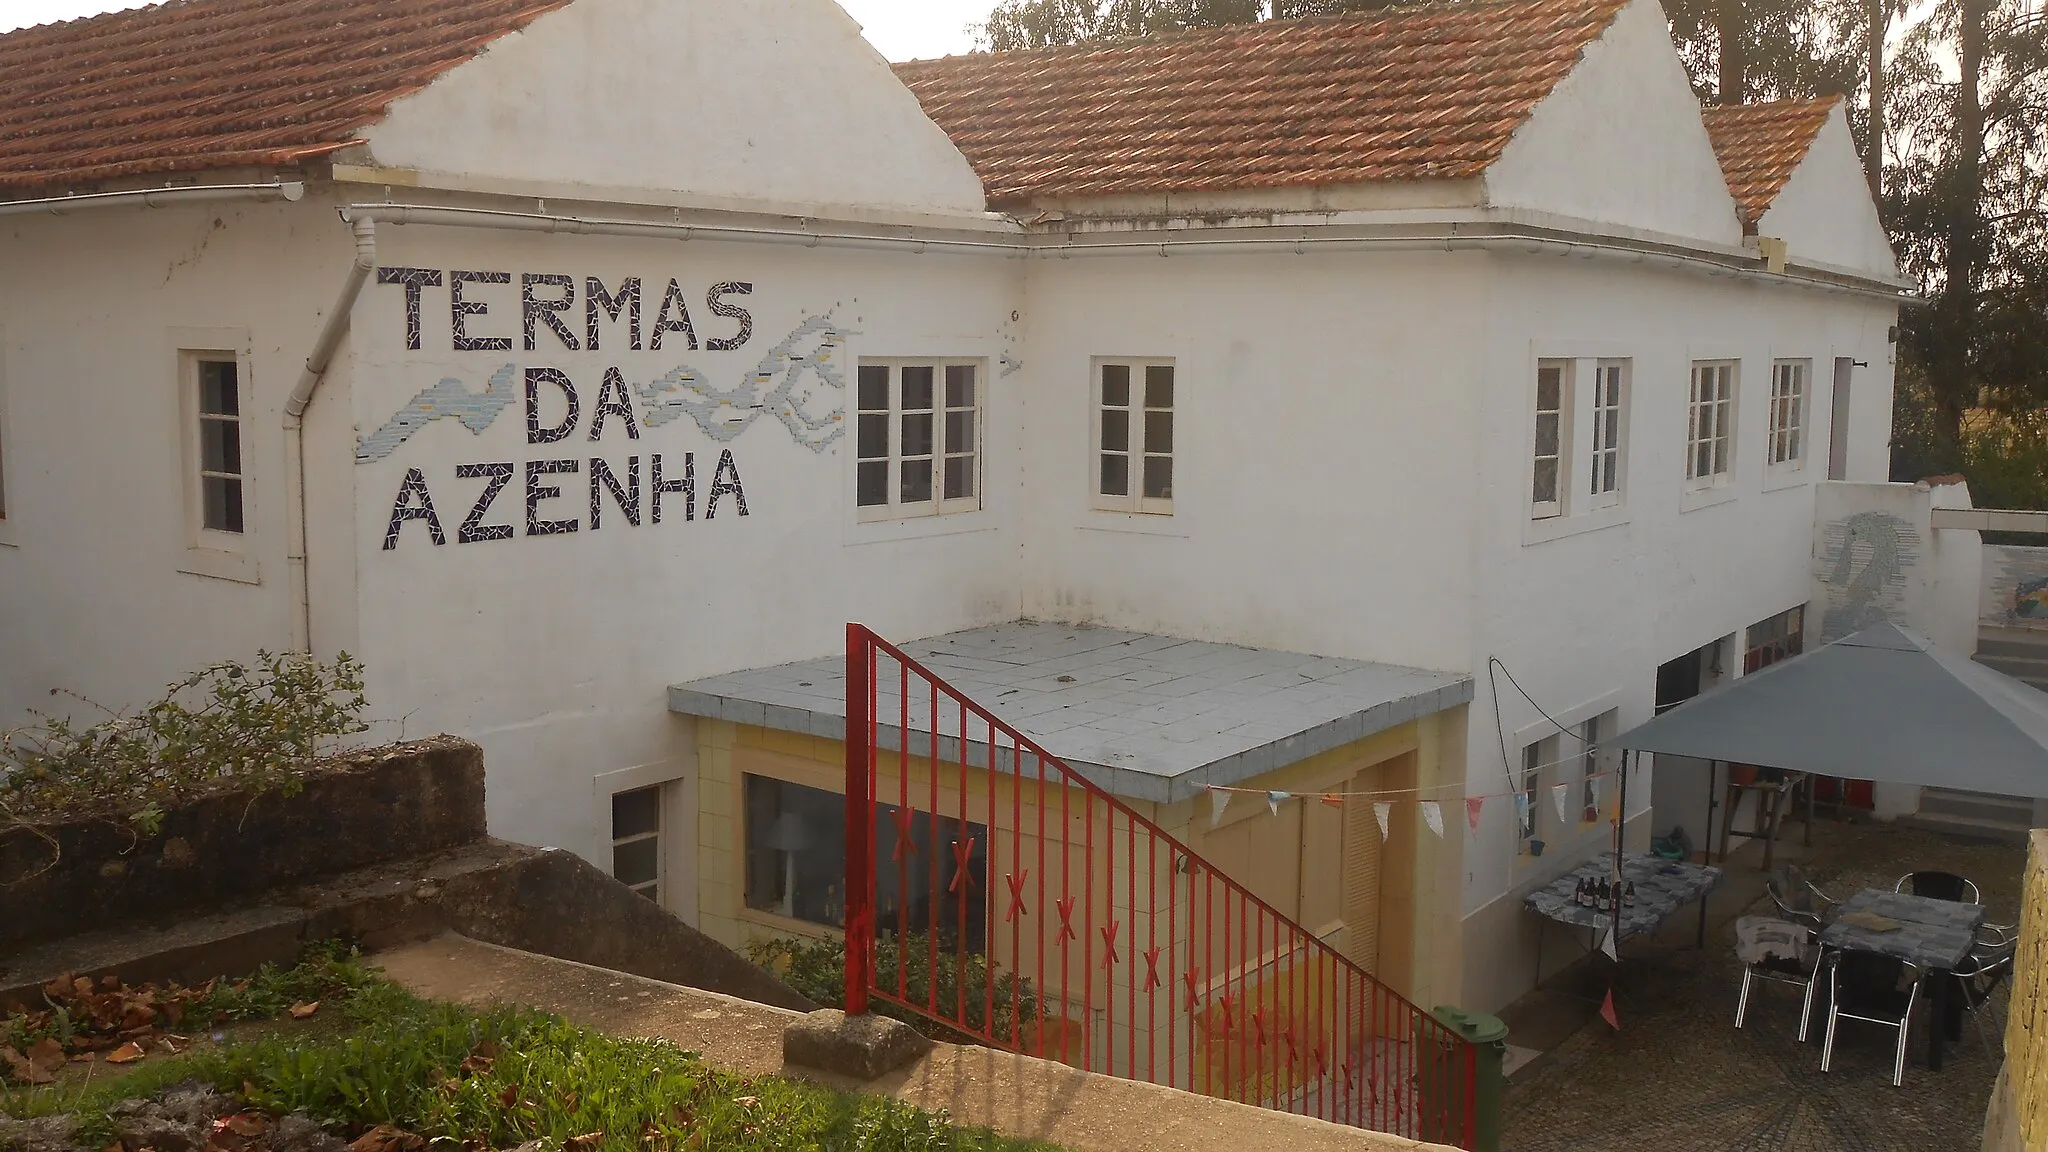 Photo showing: The thermal baths of Termas da Azenha were originally established in 1711 and reopend in 2000 as hotel with spa and holiday houses.